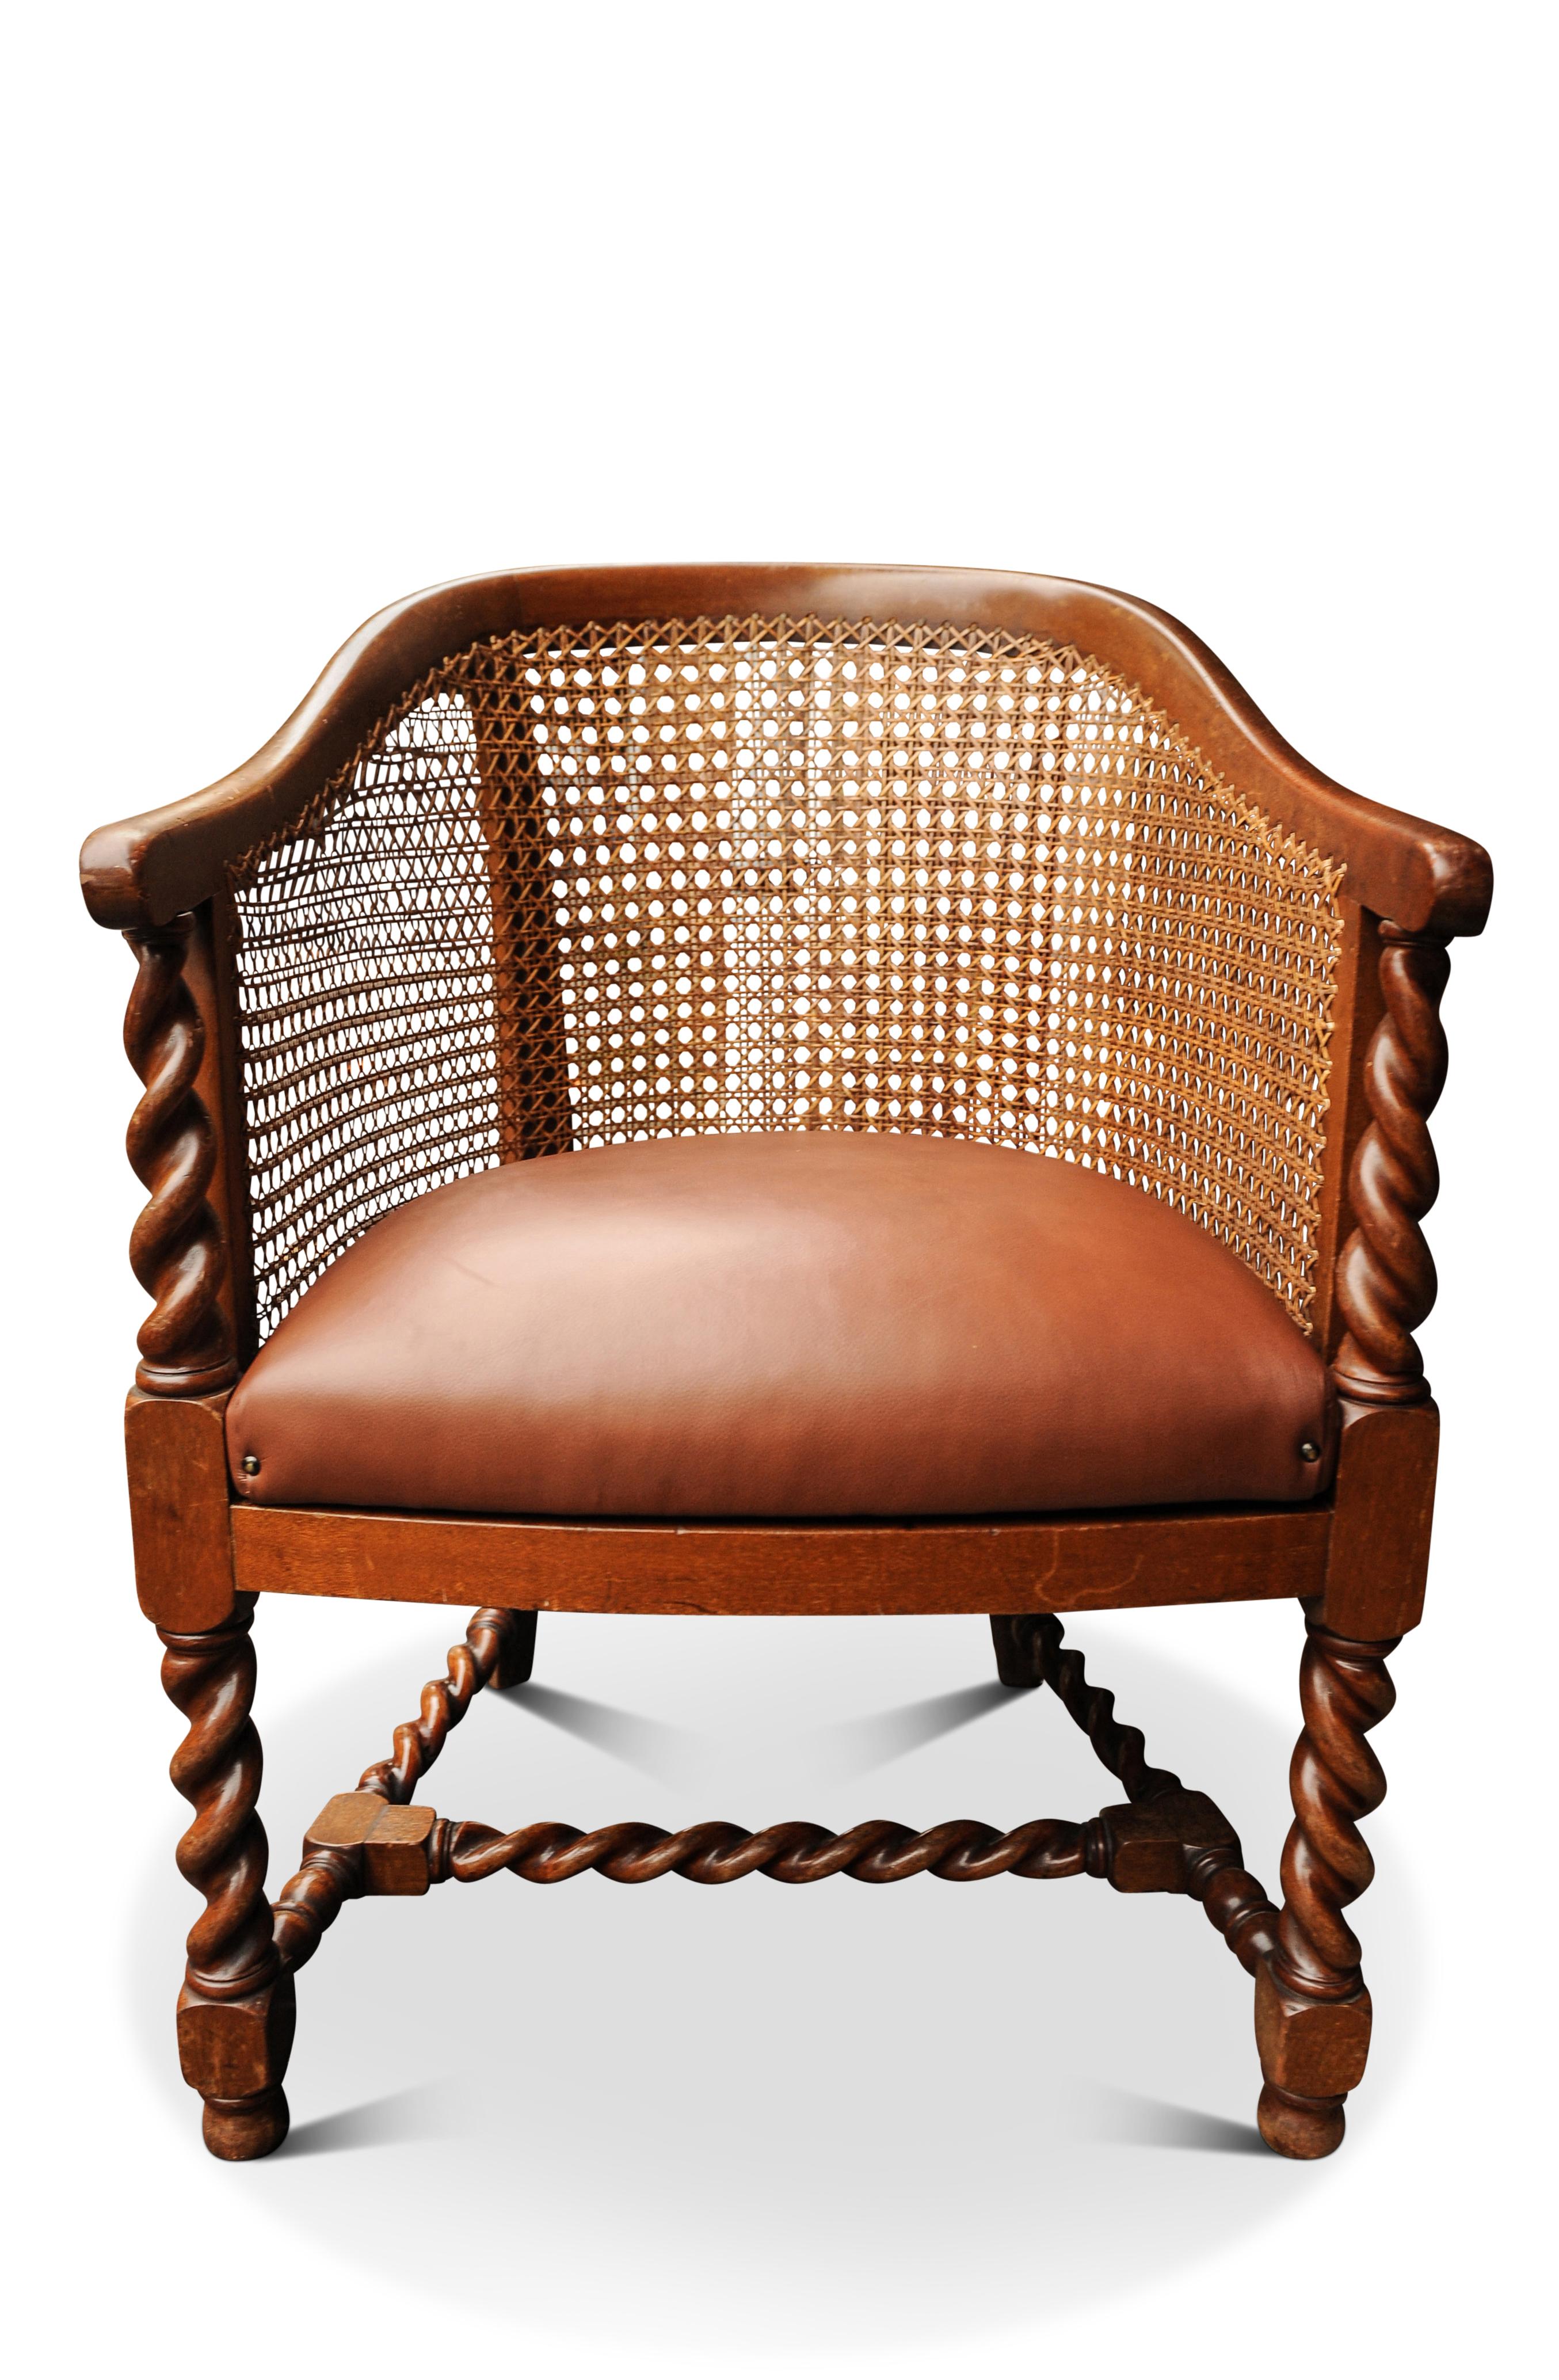 Antique Bergere Barley Twist Library Armchair with Brown Leather Seat For Sale